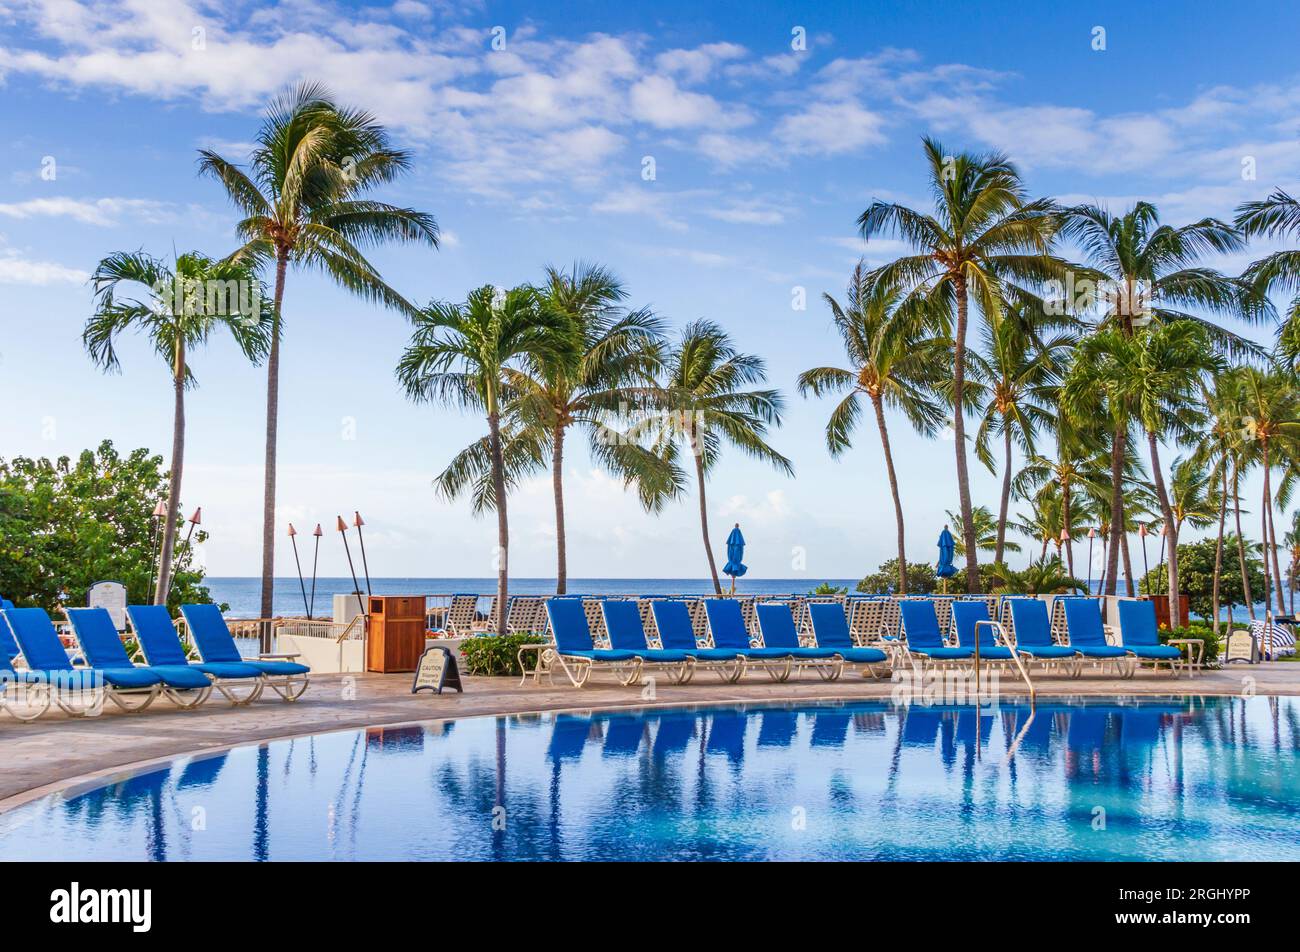 Swimming pool and beach at JW Marrriott hotel and resort on Oahu in Hawaii. Stock Photo